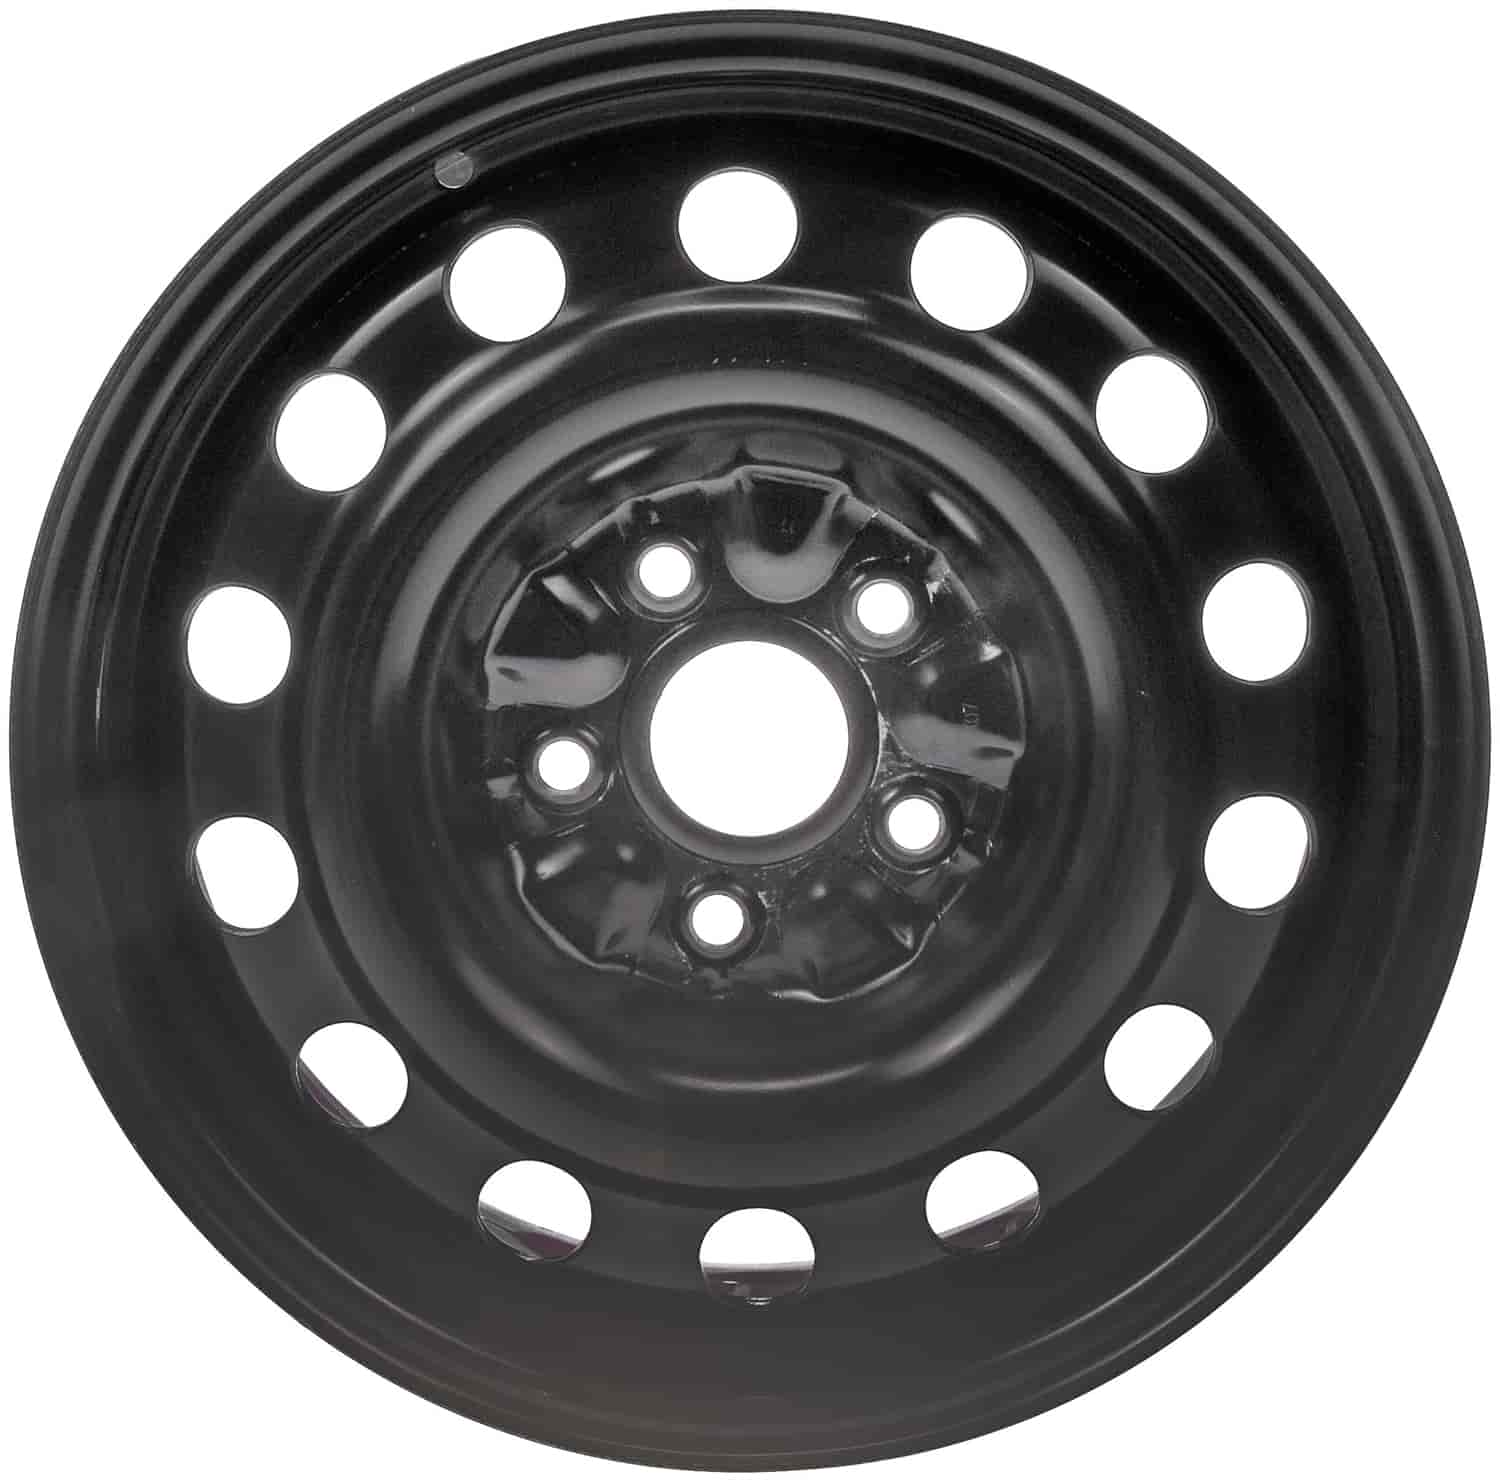 939-121 Steel Wheel for 2007-2011 Toyota Camry